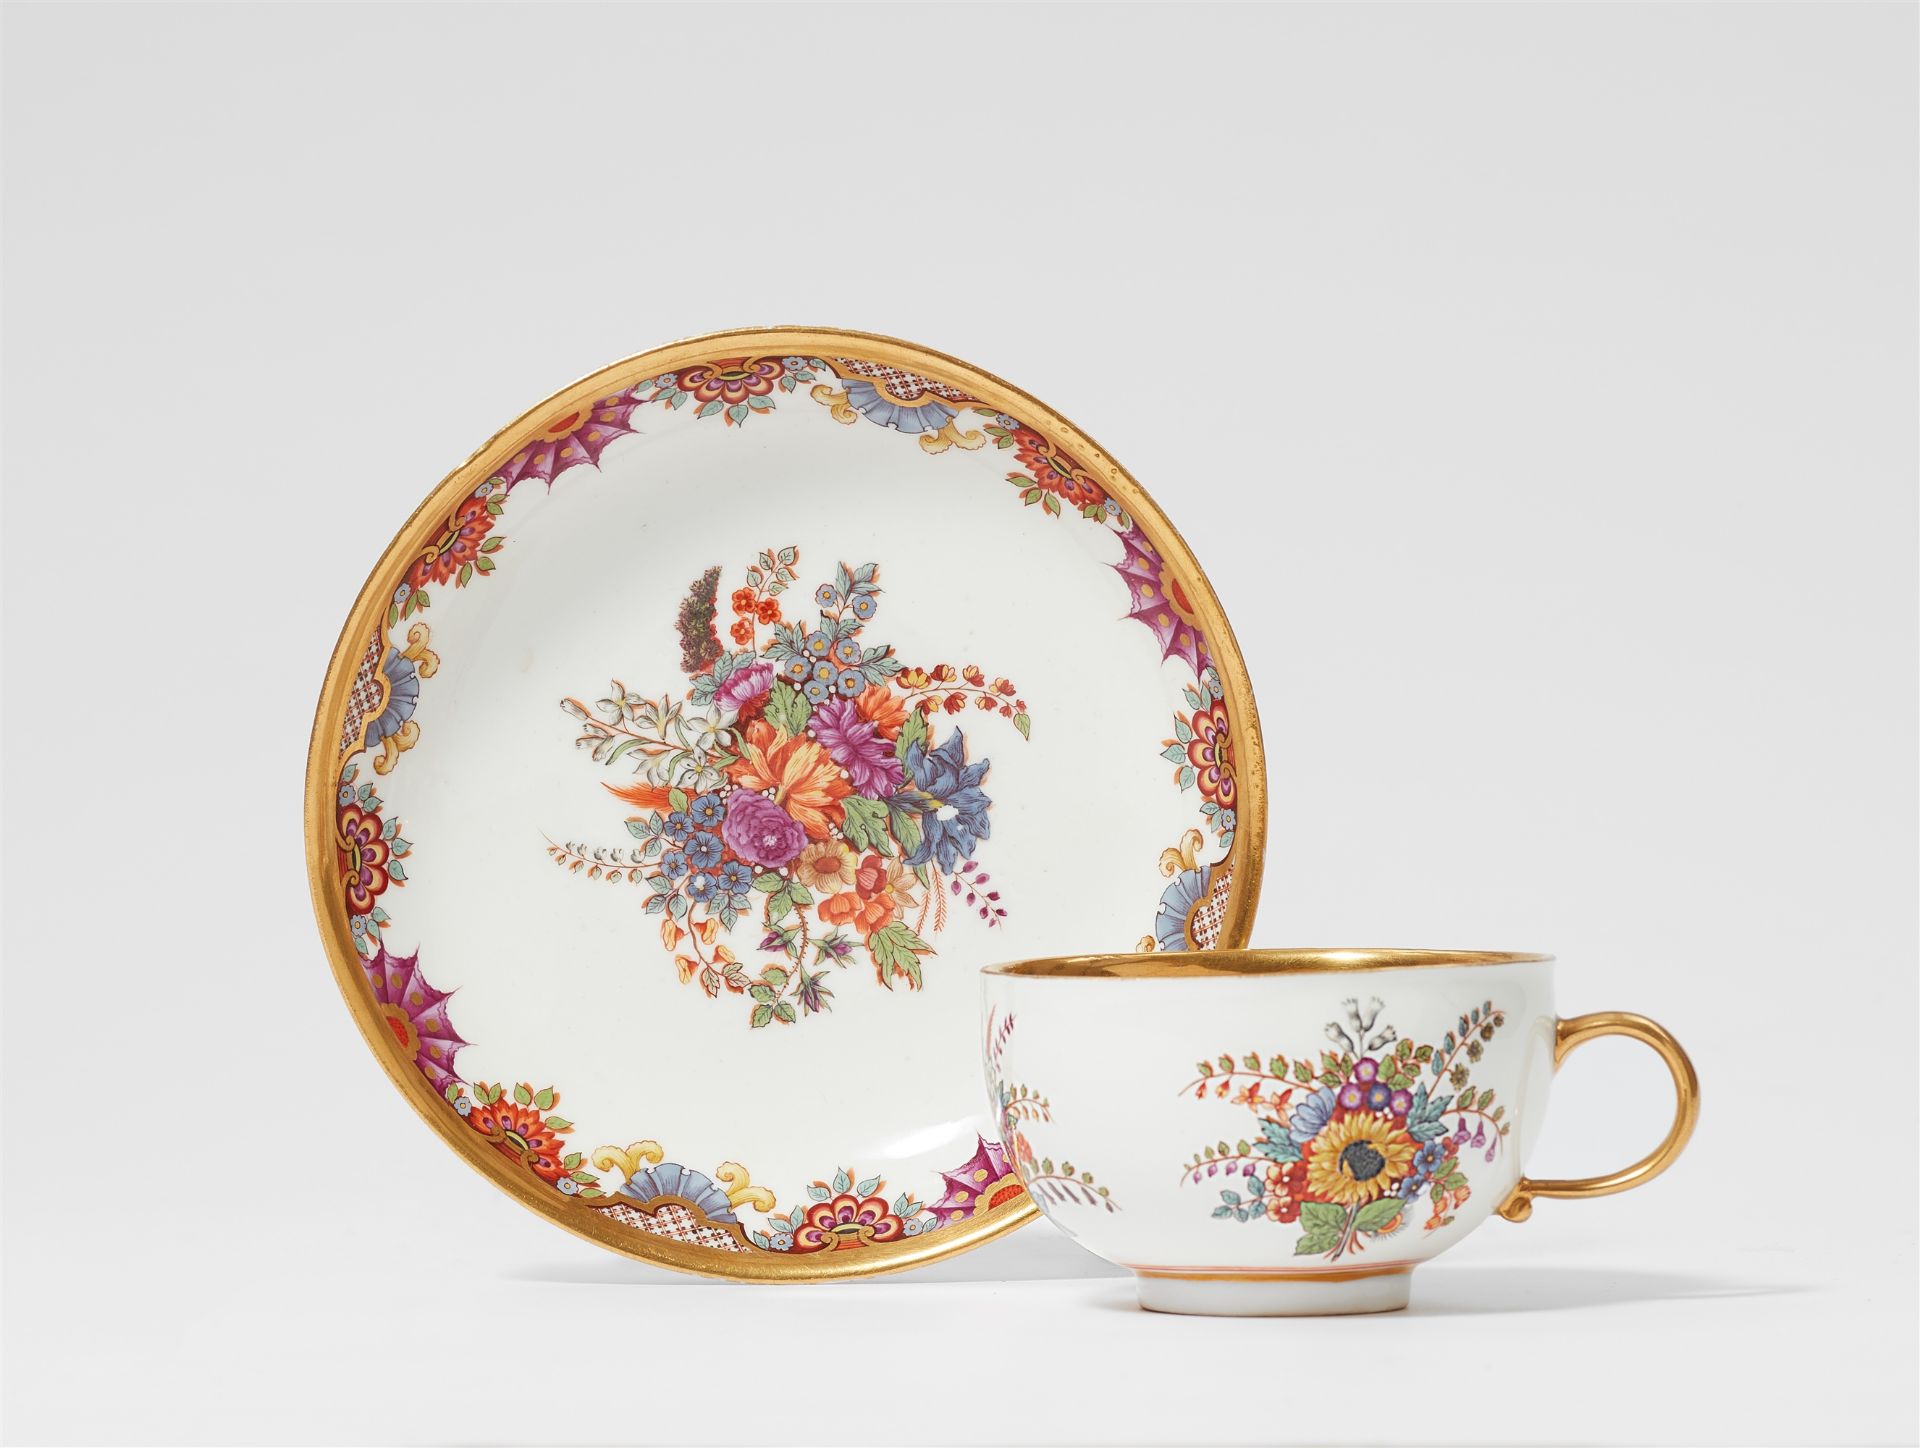 A Meissen porcelain cup and saucer with "hausmaler" decor